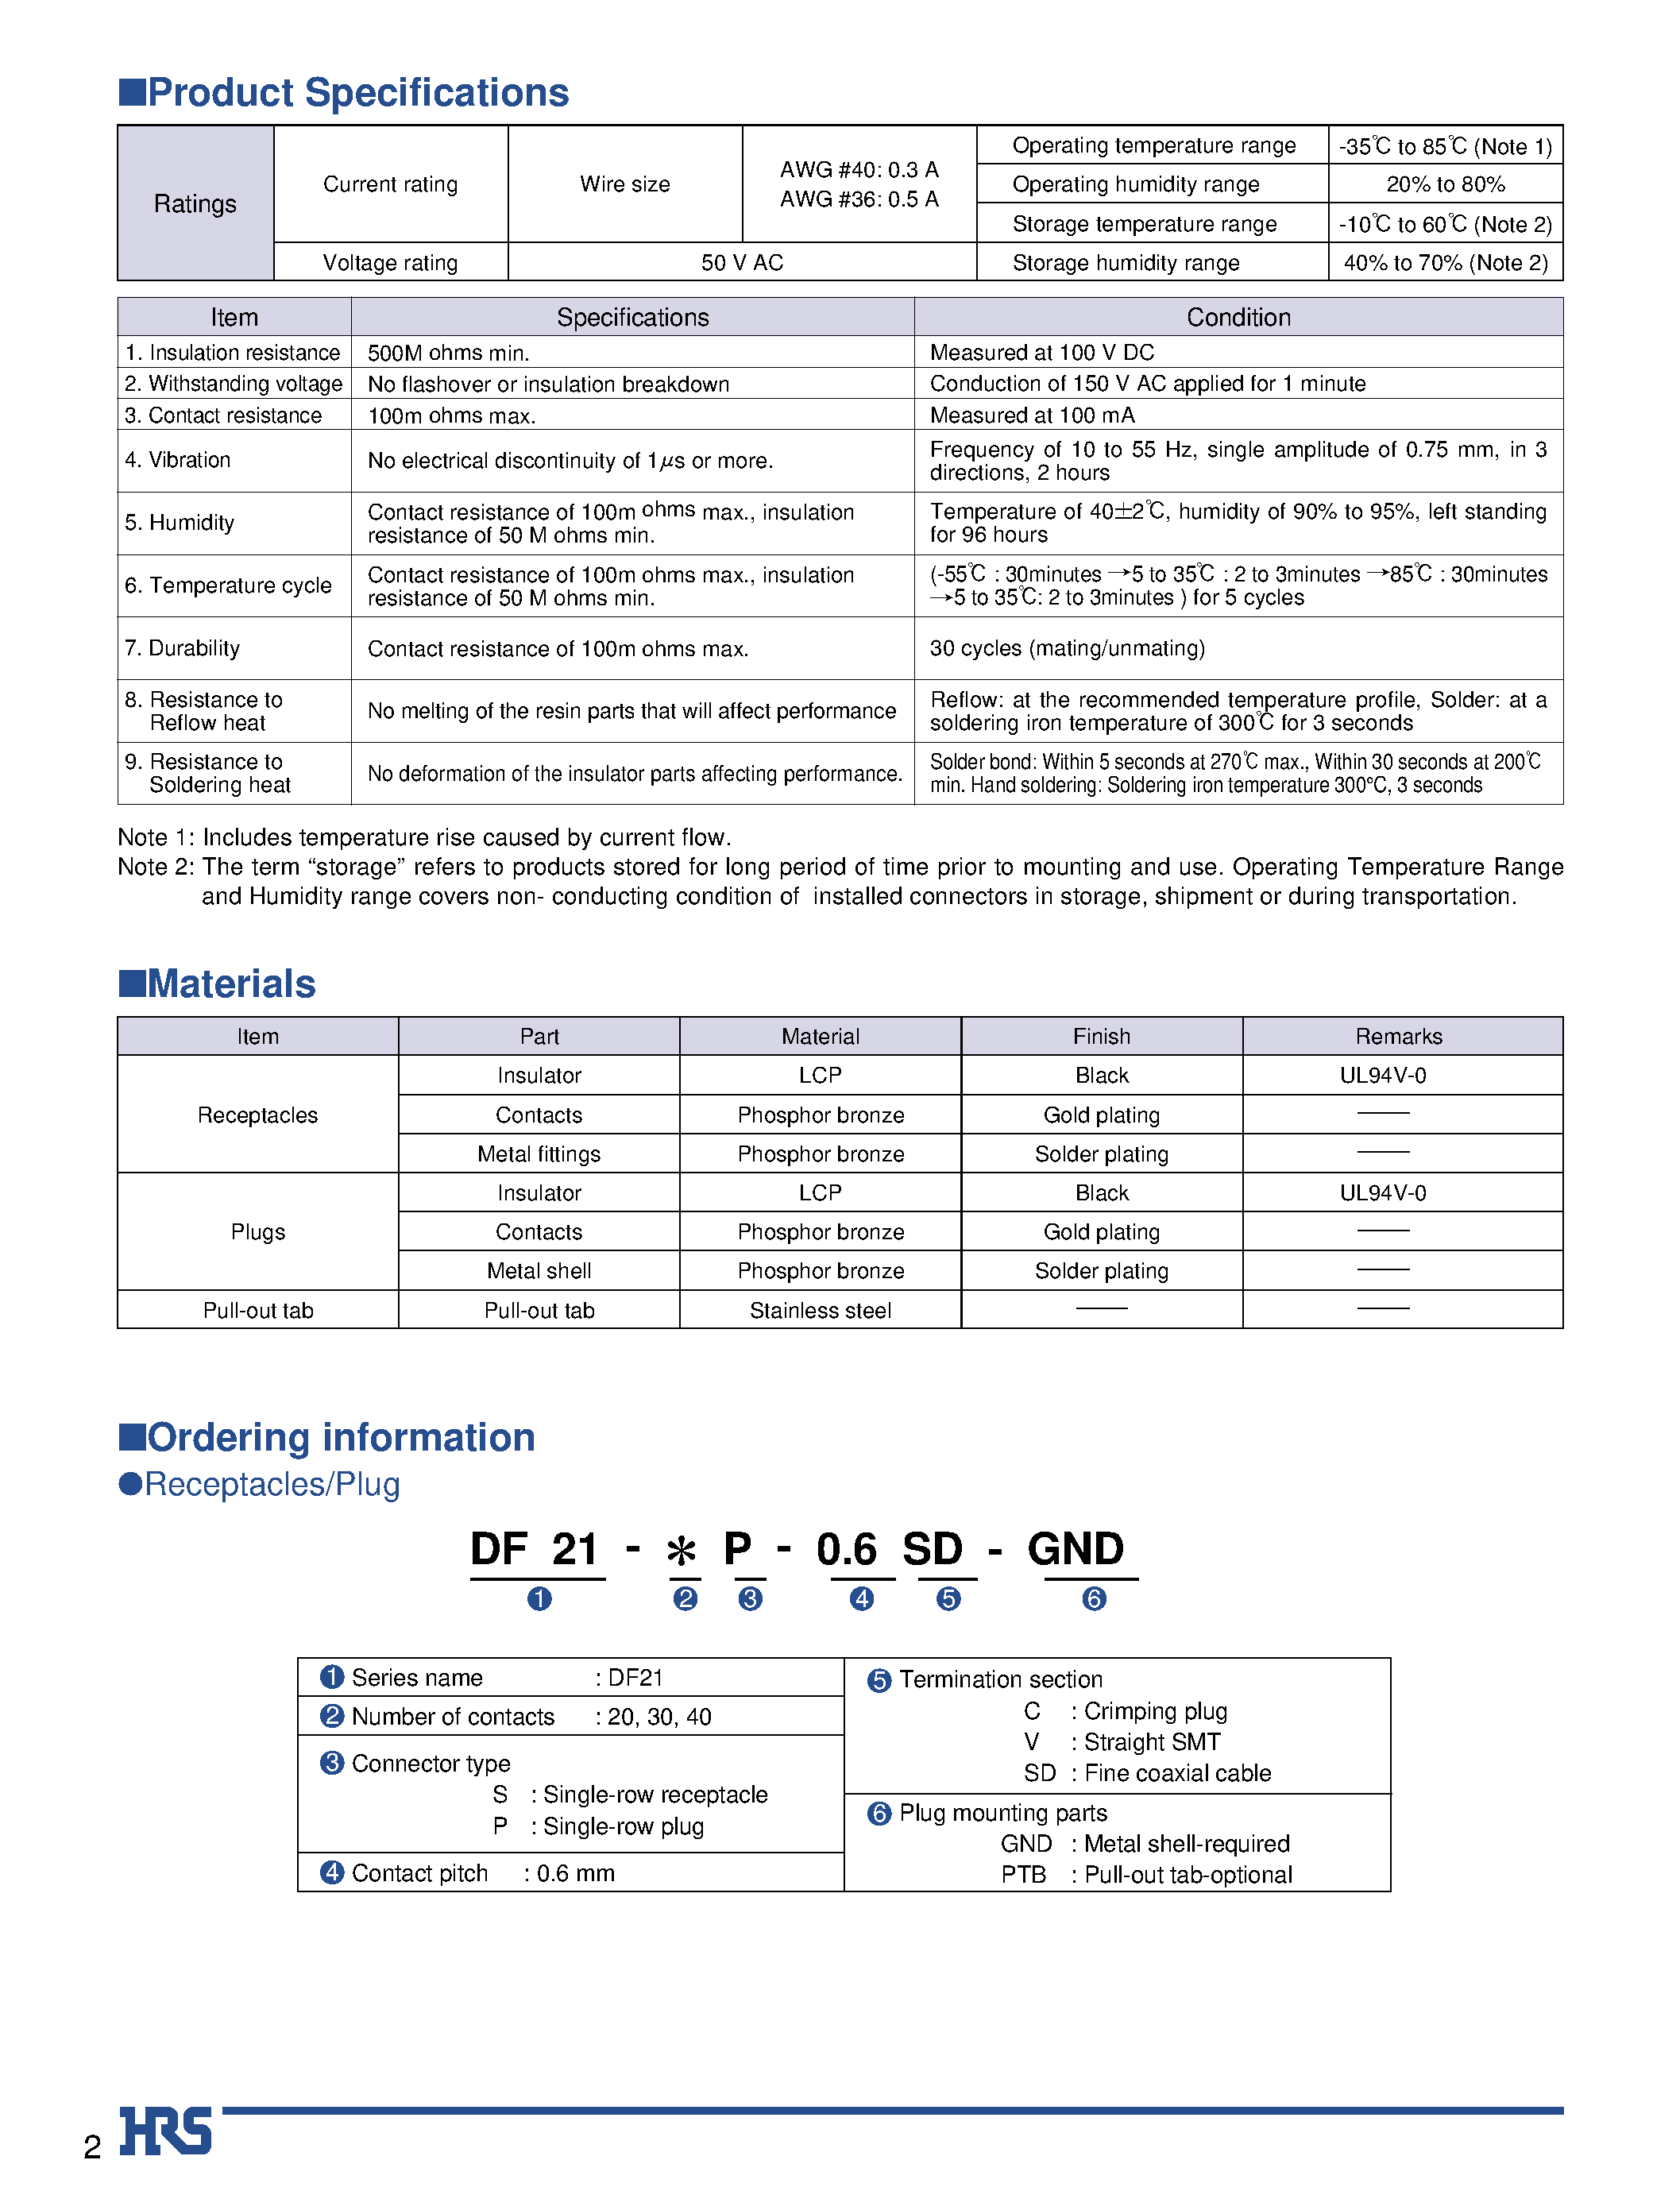 Datasheet DF21-40P-0.6SD-GND - 0.6mm Pitch Board-to-Fine-Coaxial Cable Connectors page 2